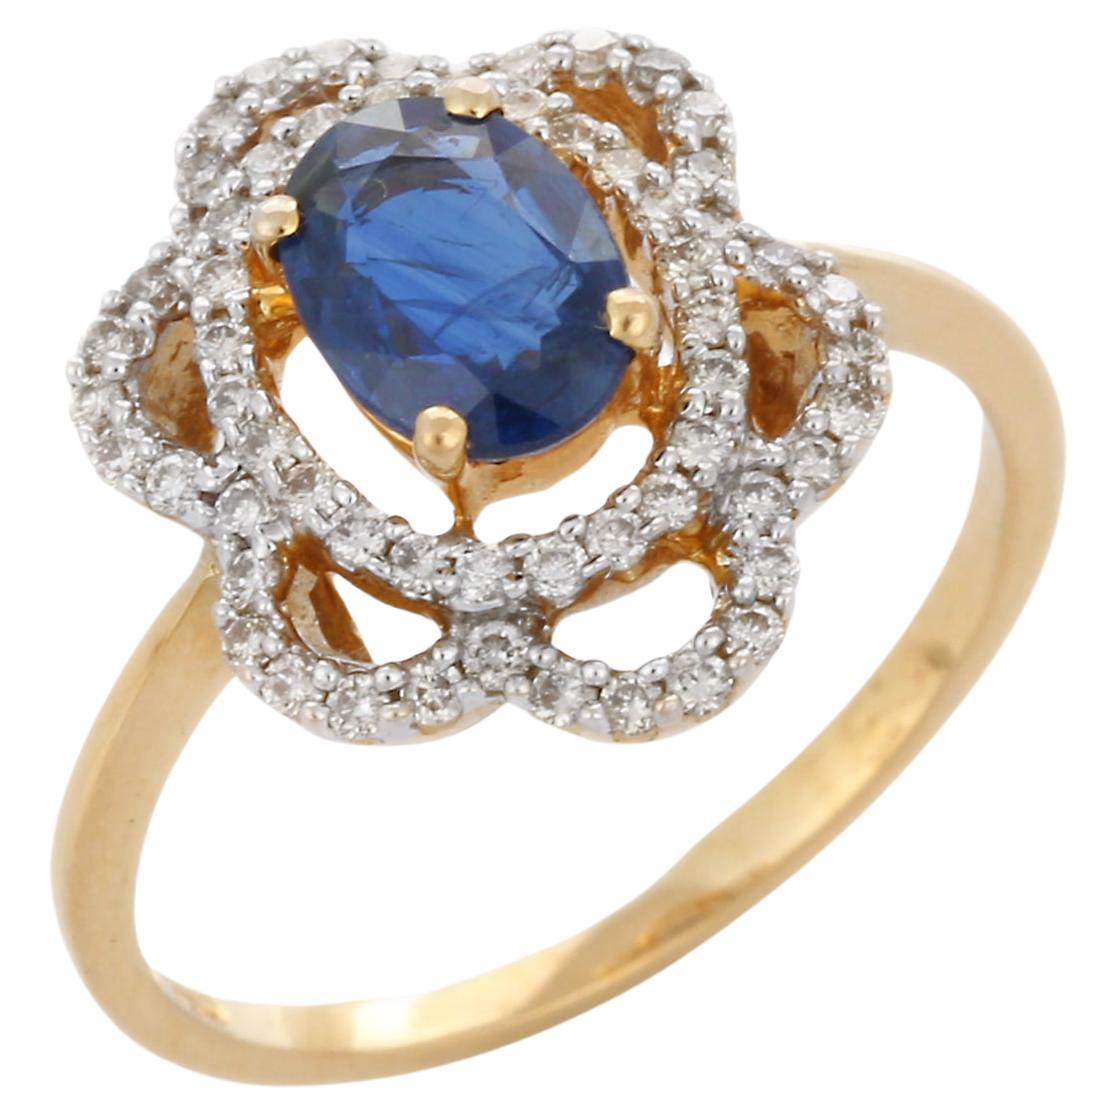 For Sale:  1.01 Ct Oval Blue Sapphire and Diamond Flower Wedding Ring in 18K Yellow Gold